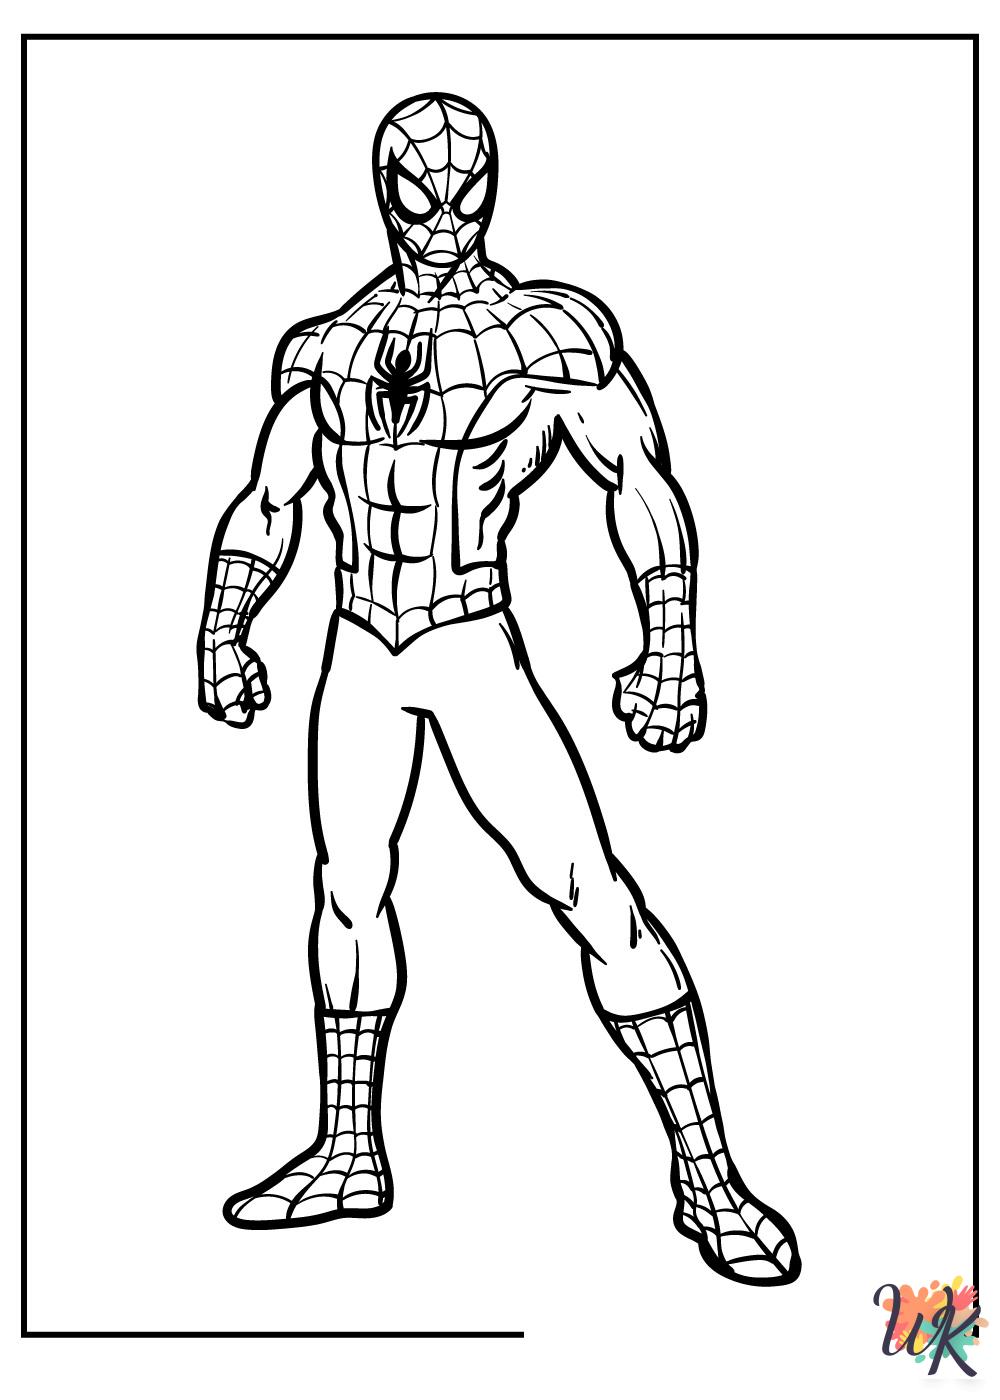 Superhero coloring pages printable